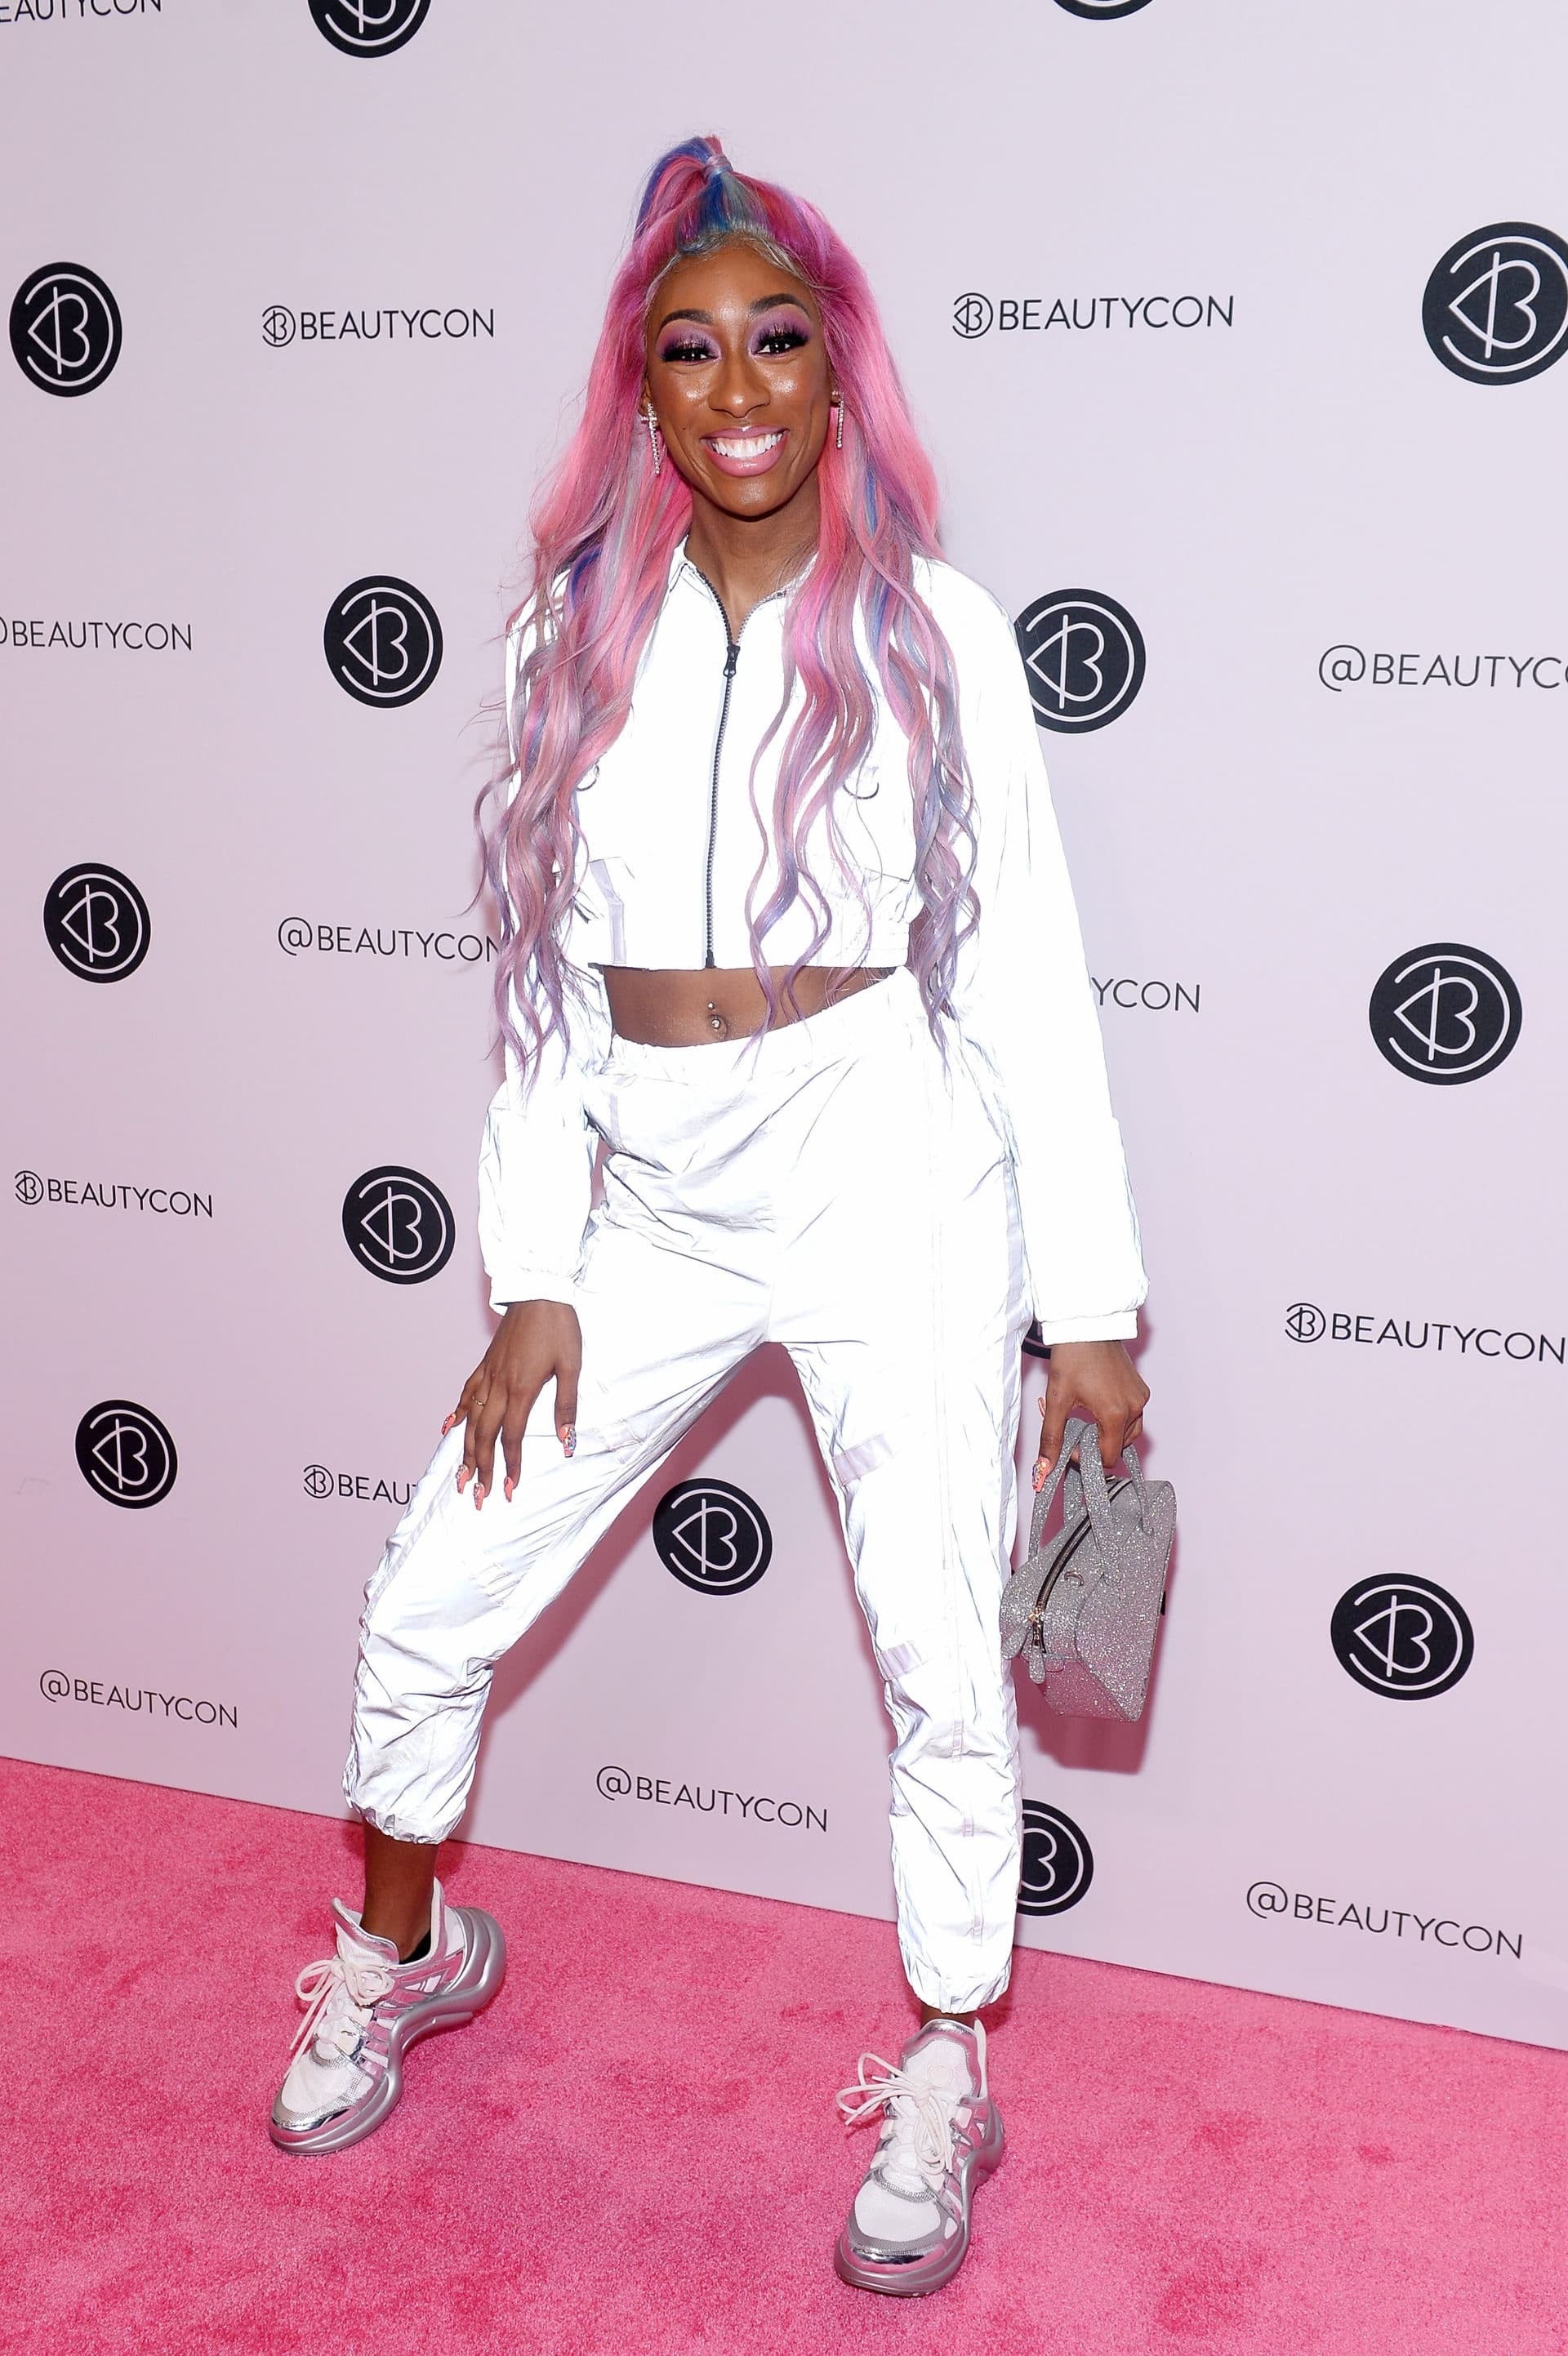 Check Out All The Beauty Looks from Beautycon NYC